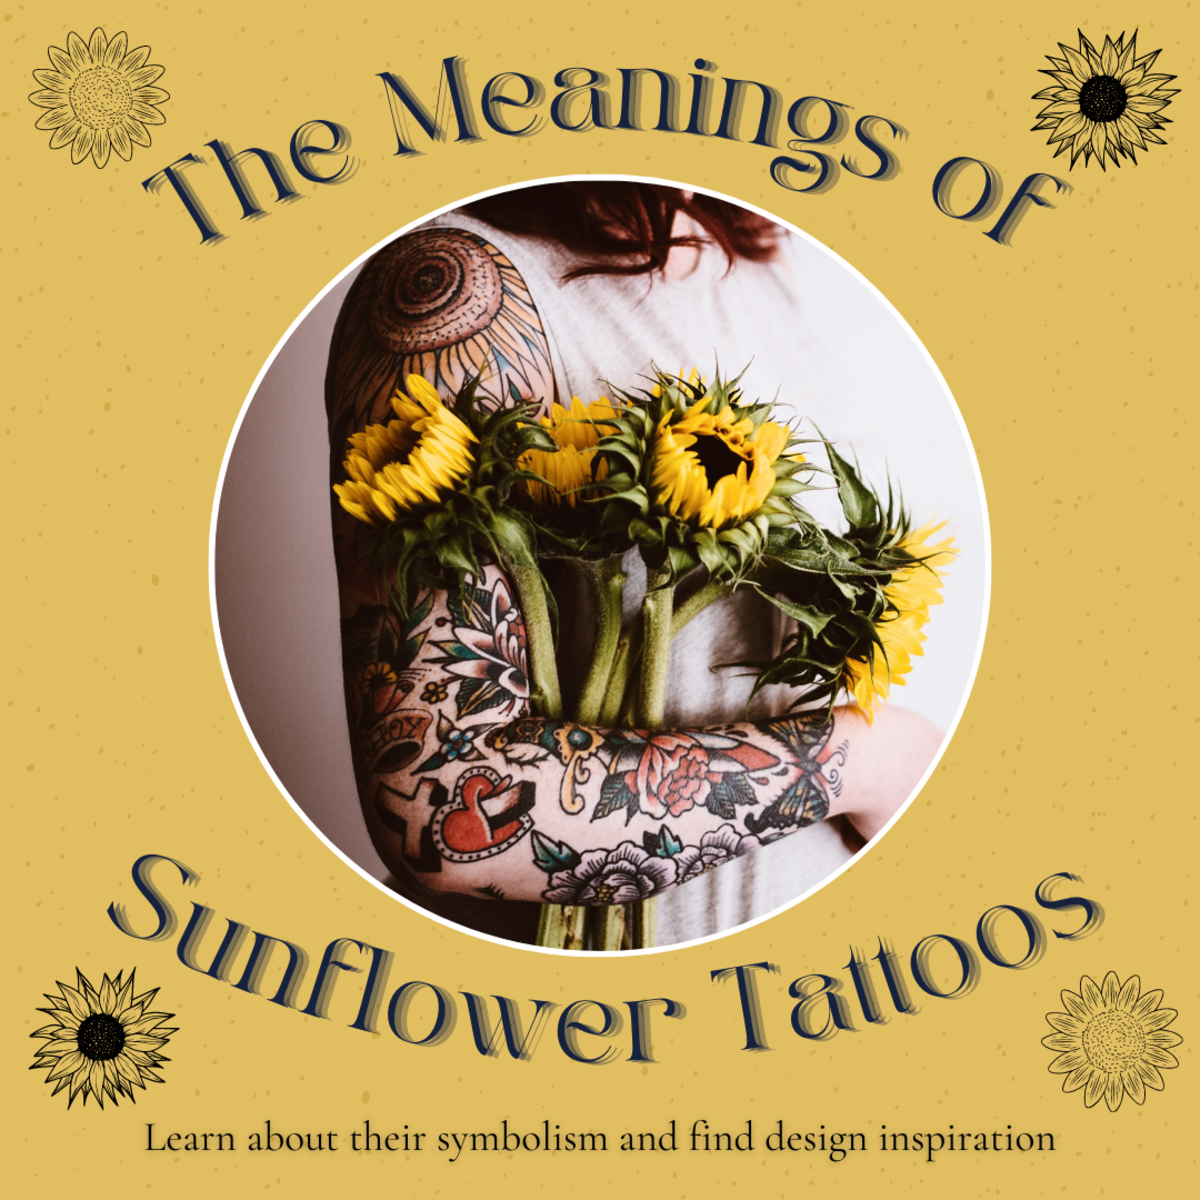 This article will look at the history and meanings of sunflowers and provide design inspiration for those looking to get a sunflower tattoo.